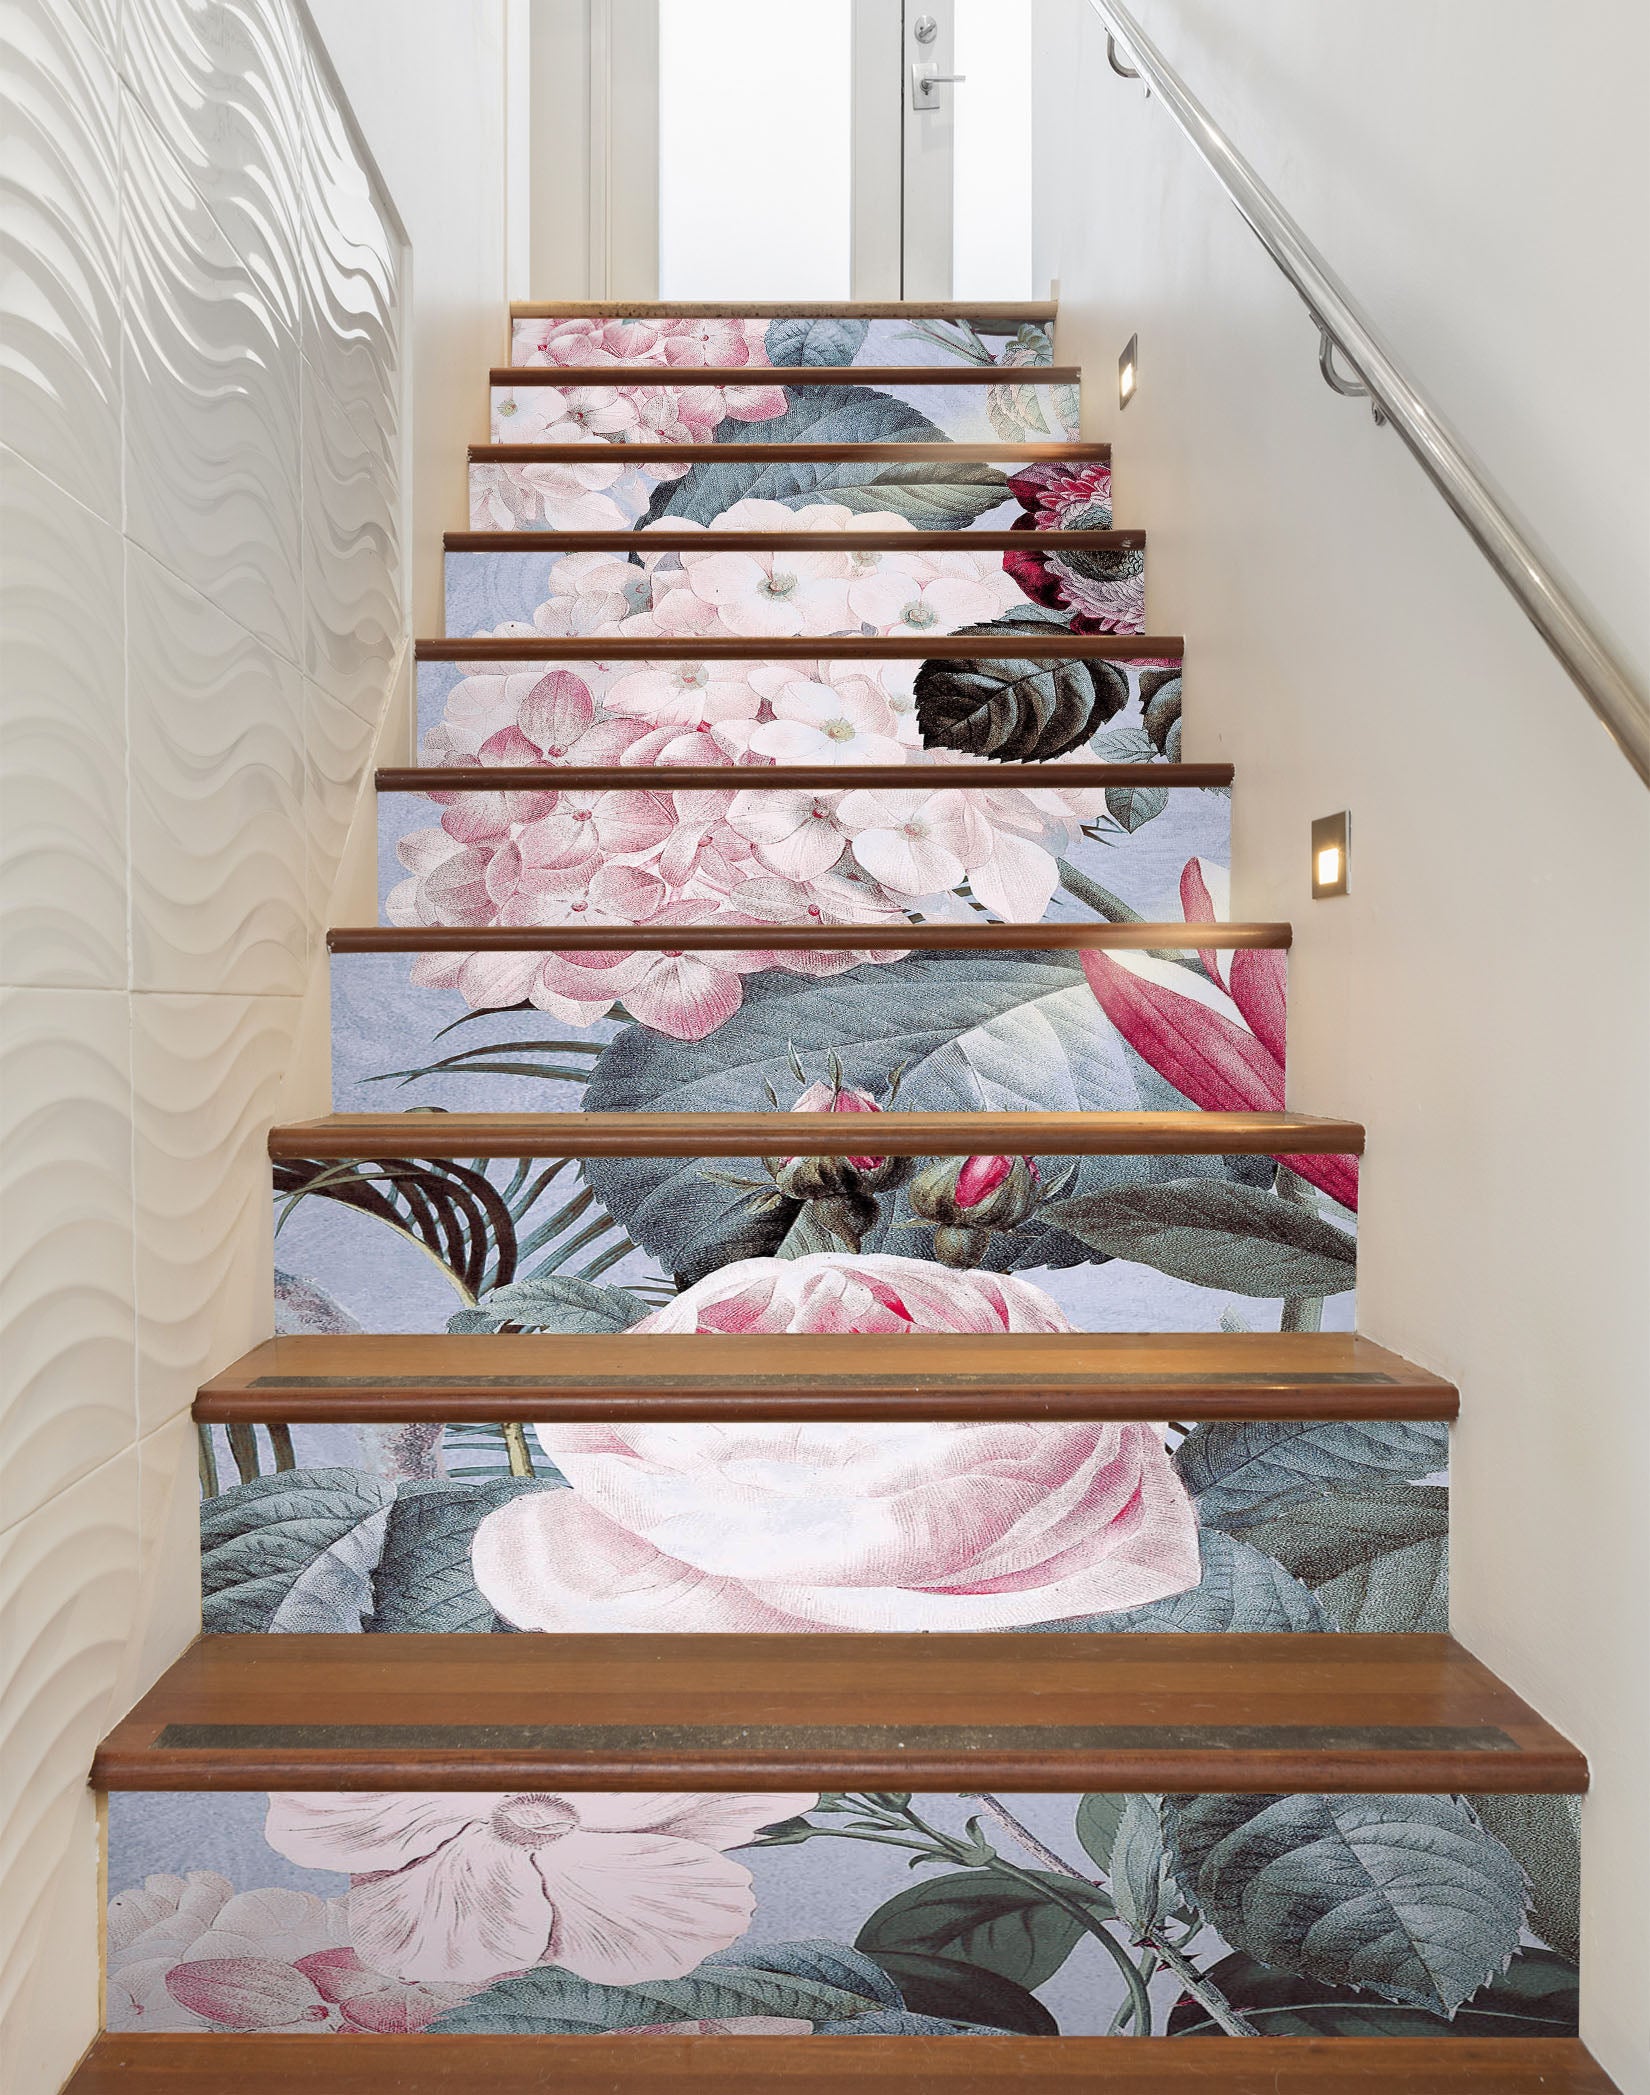 3D Flower Insect 11004 Andrea Haase Stair Risers